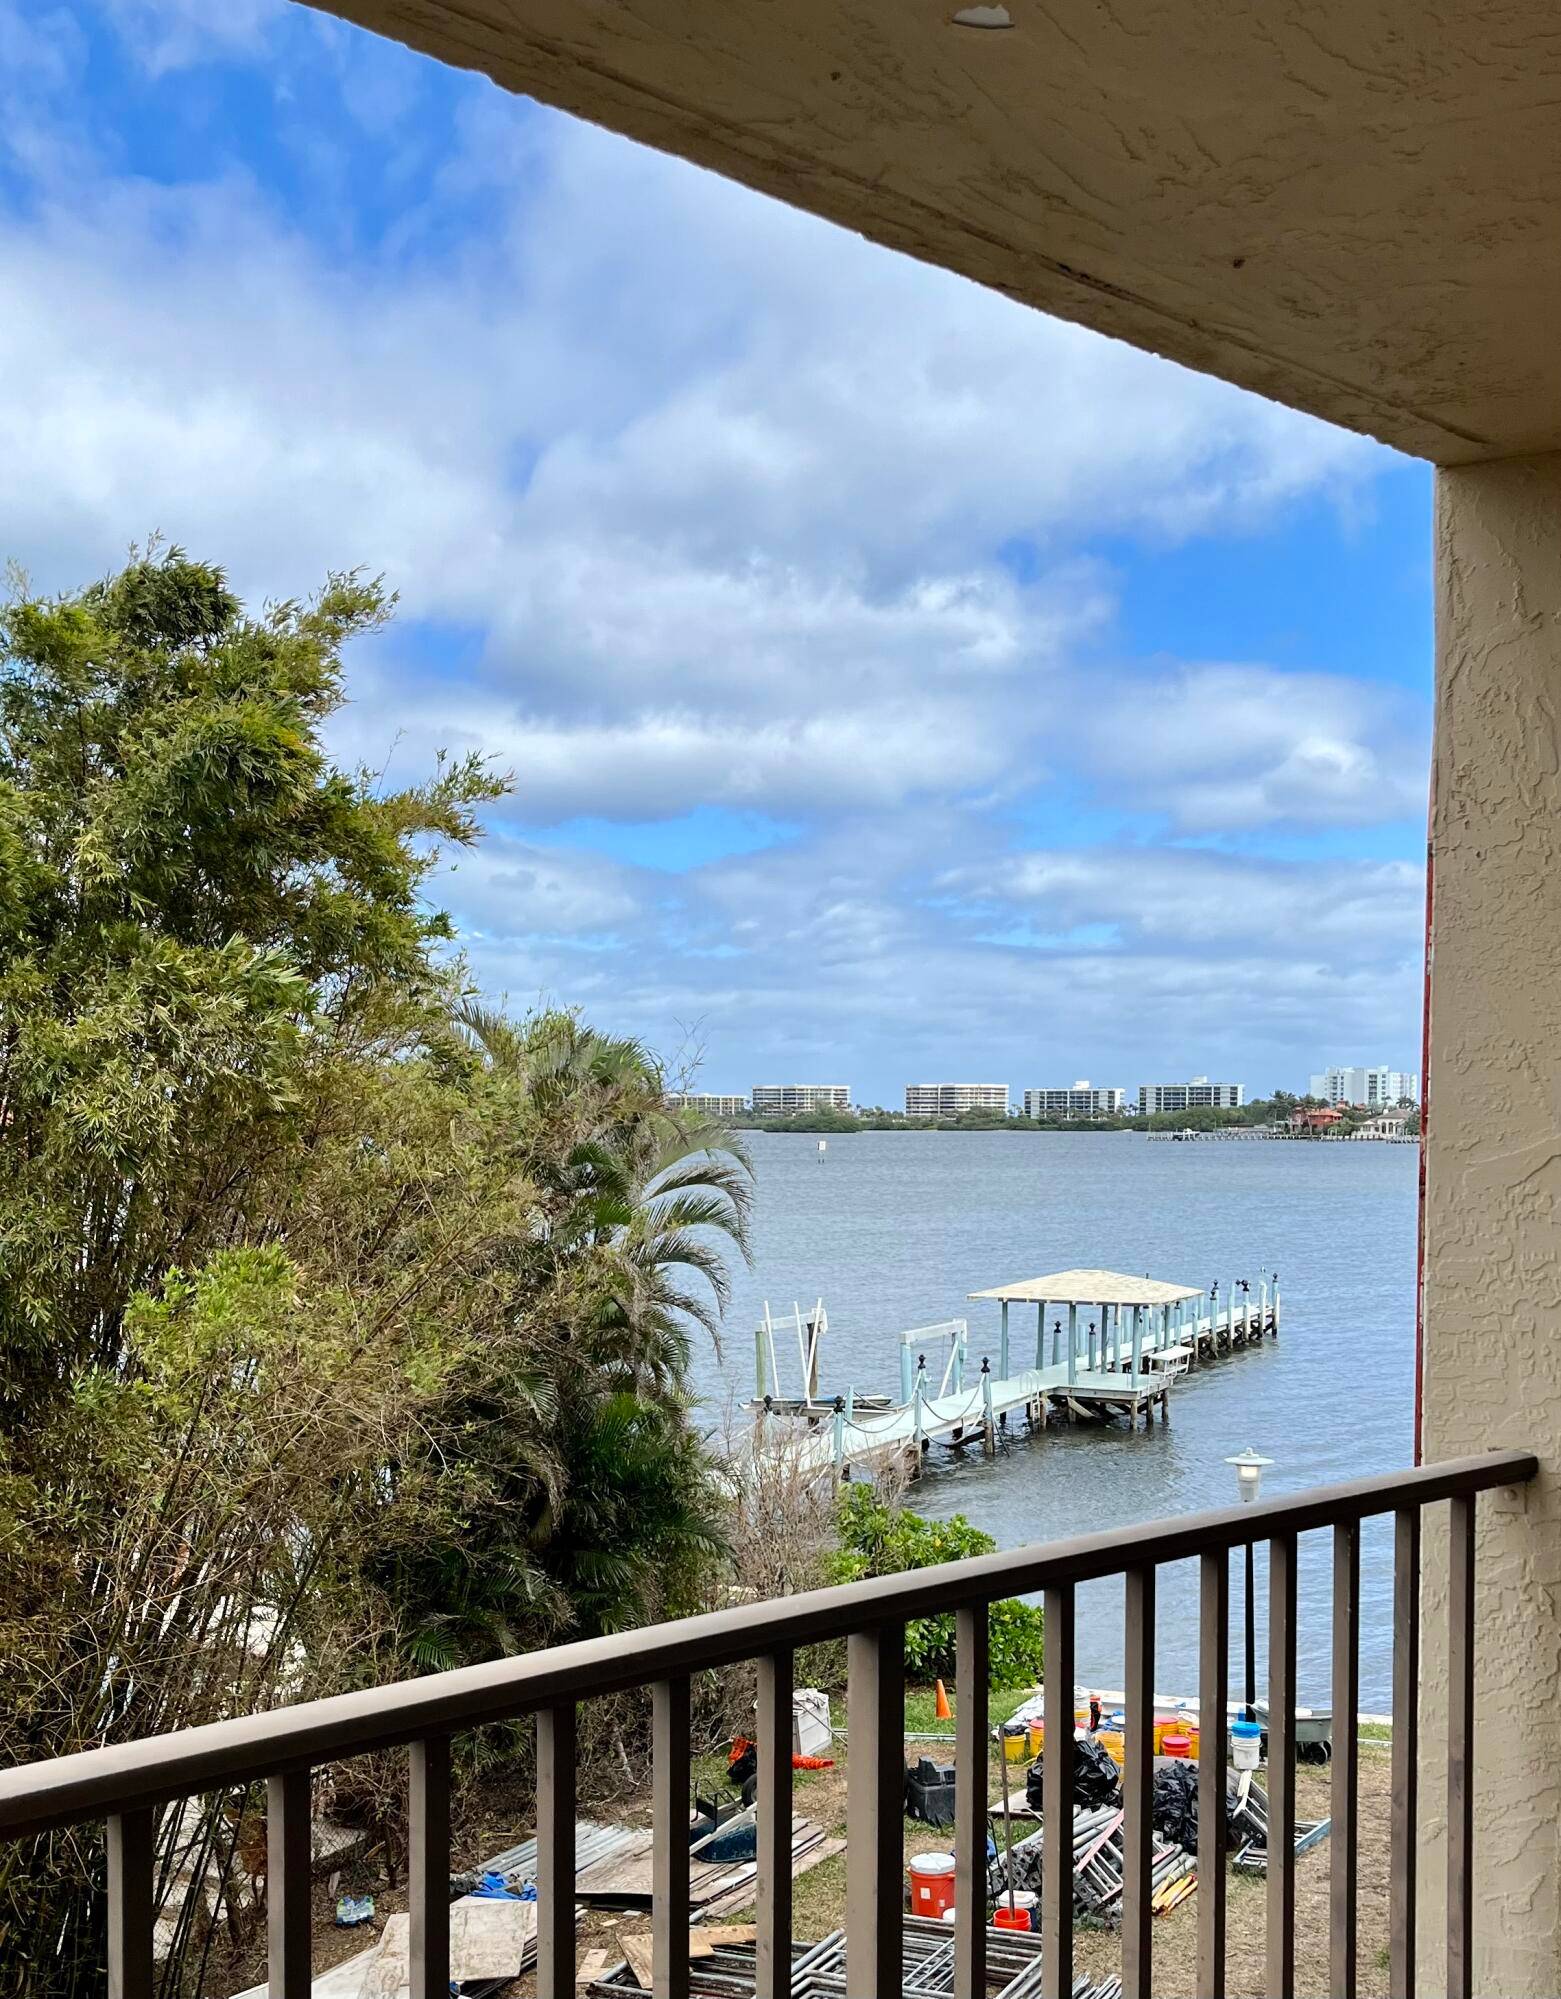 Waterfront Living or a Rentable Condo with Intracoastal views from this stunning 2 bed 2 bath condo, offering picturesque views of the Intracoastal waterway.